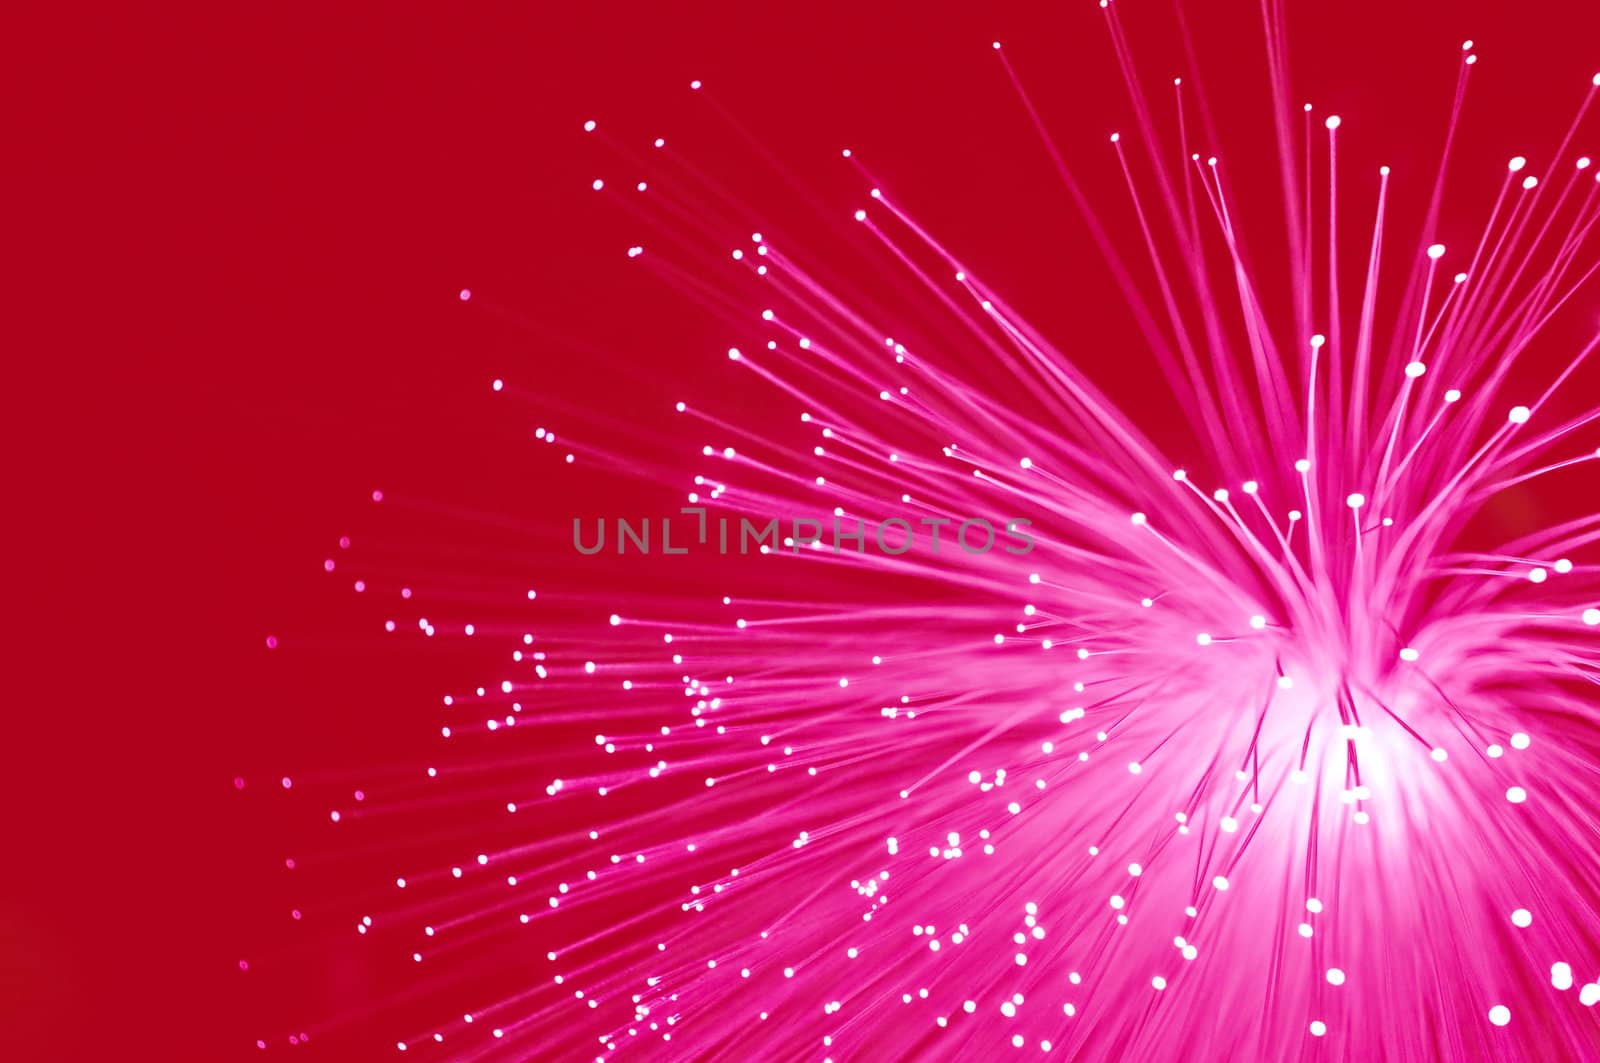 Abstract style close up capturing bright pink illuminated fibre optic light strands against a bright red background.